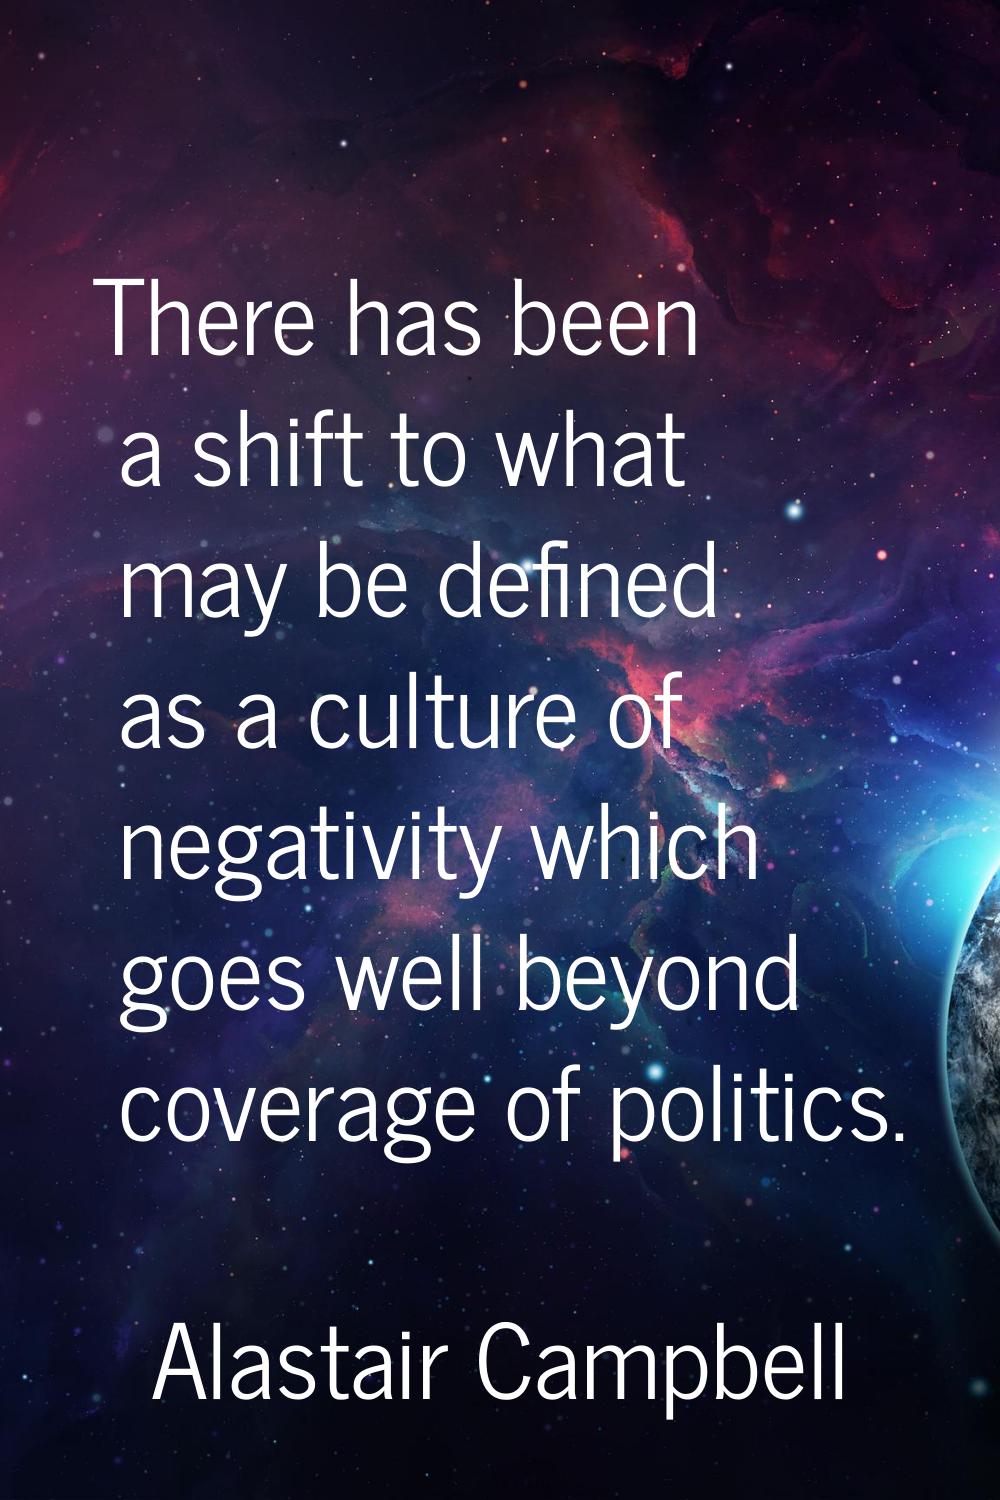 There has been a shift to what may be defined as a culture of negativity which goes well beyond cov